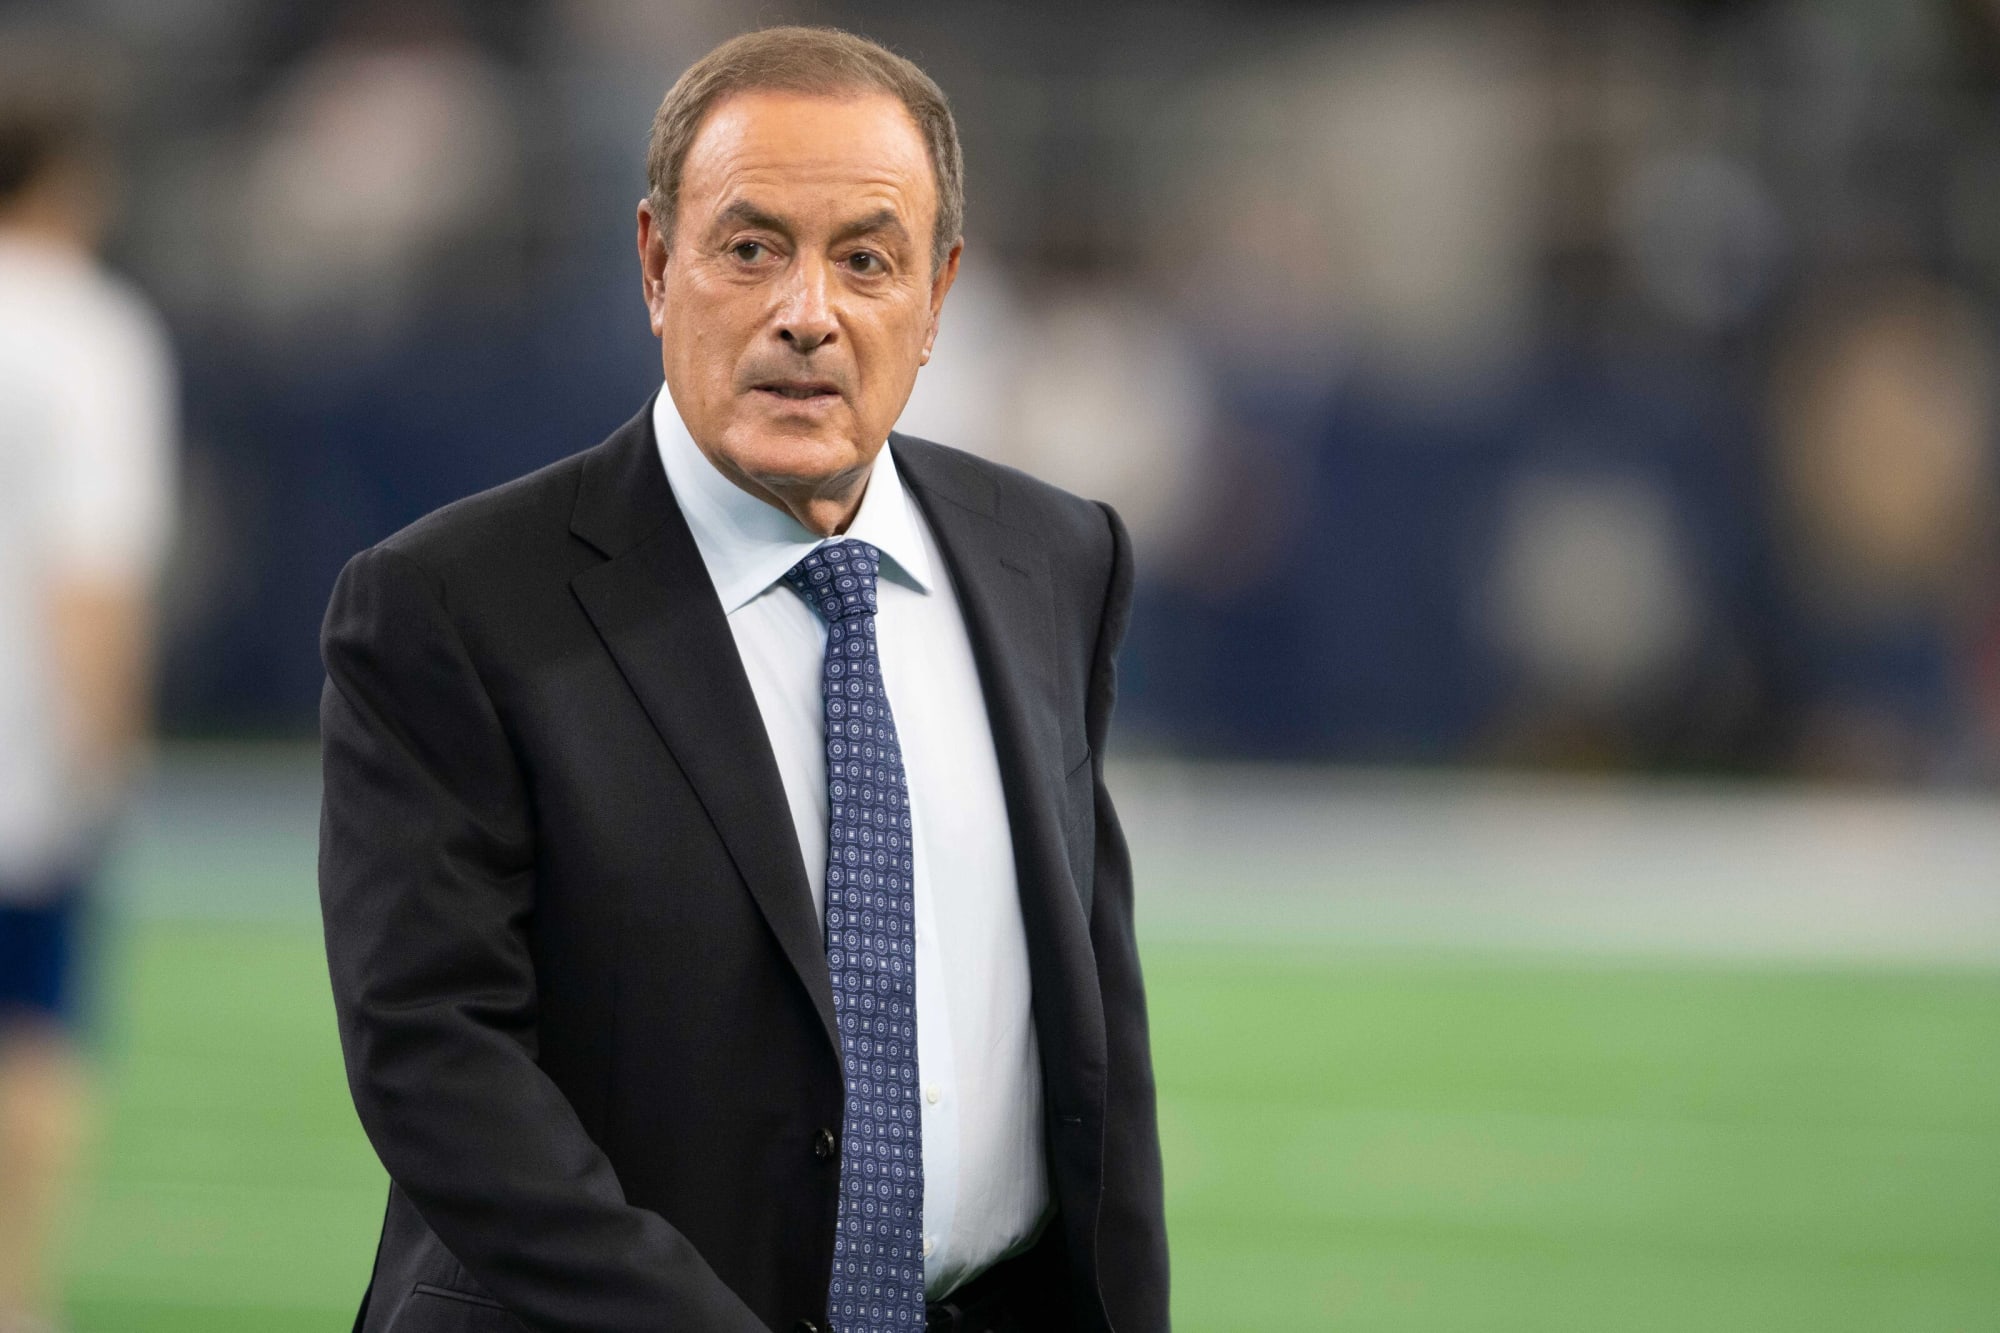 NFL Twitter facepalms over how Al Michaels handled the Deshaun Watson discussion